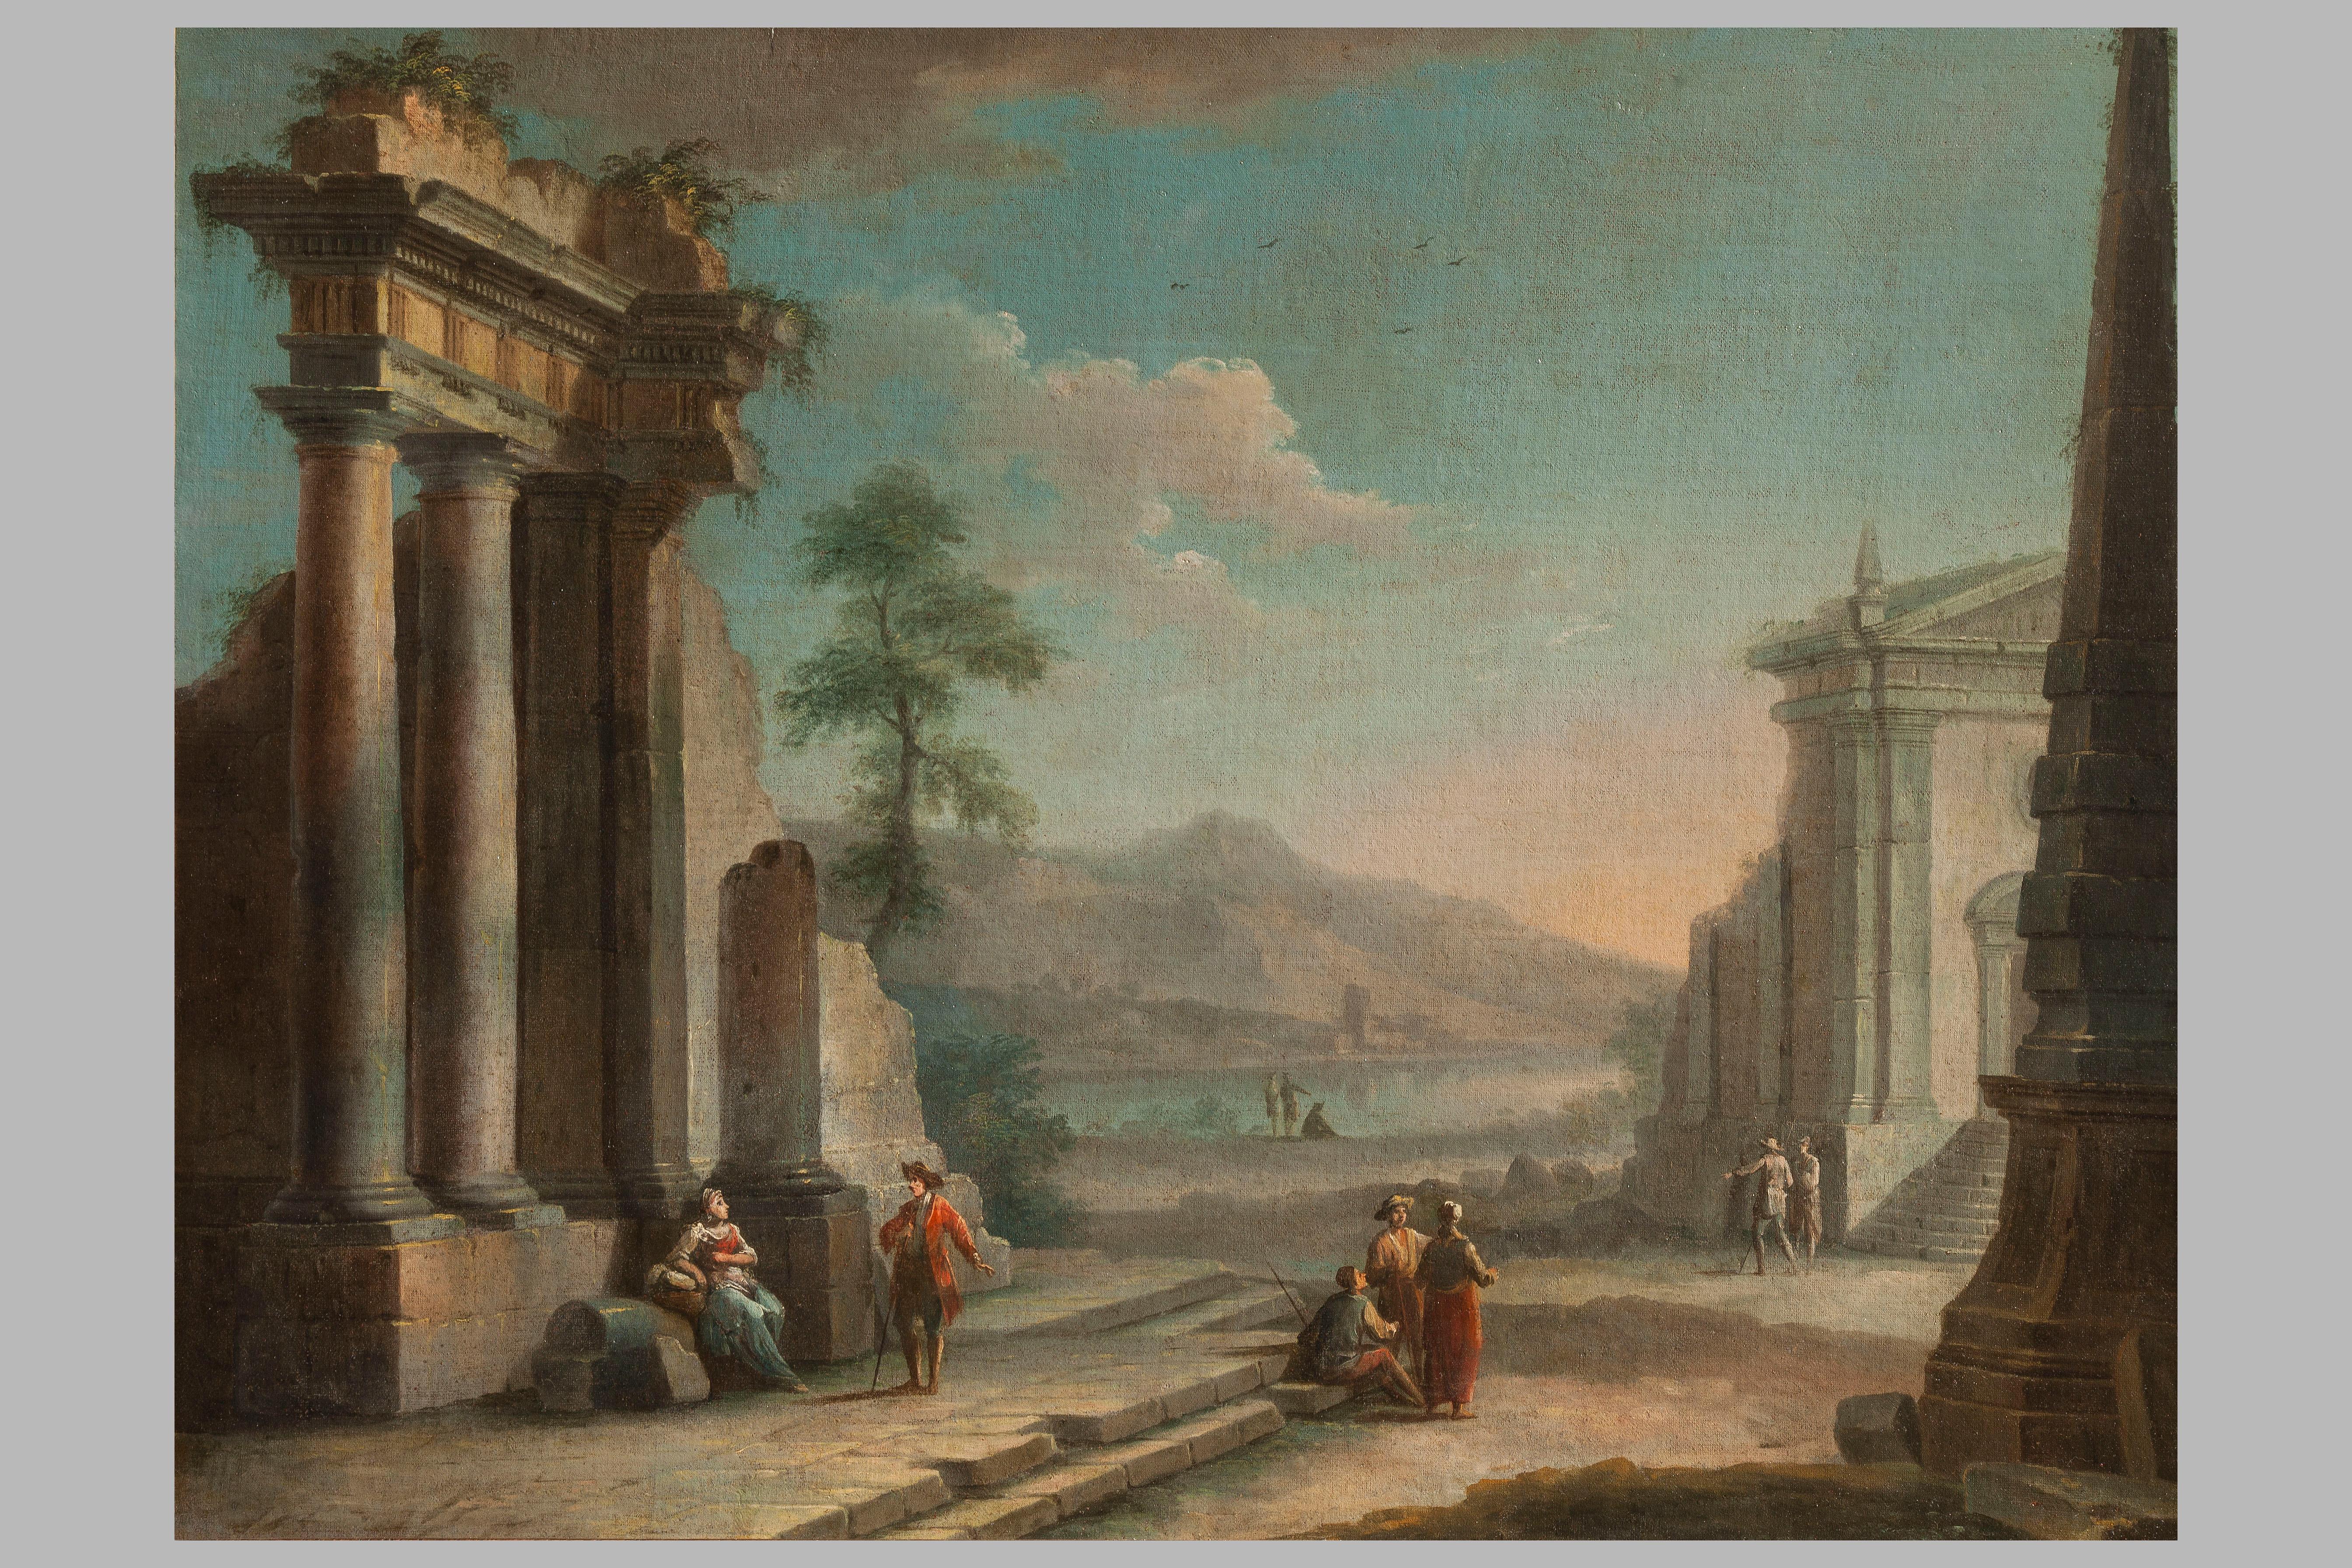 The price is intended for the couple of paintings.


Expertise by Prof. Giancarlo Sestieri.

This pair of paintings by Giovanni Domenico Gambone (1720 – 1793) depicts an architectural capriccio with archaeological ruins and people who interact with